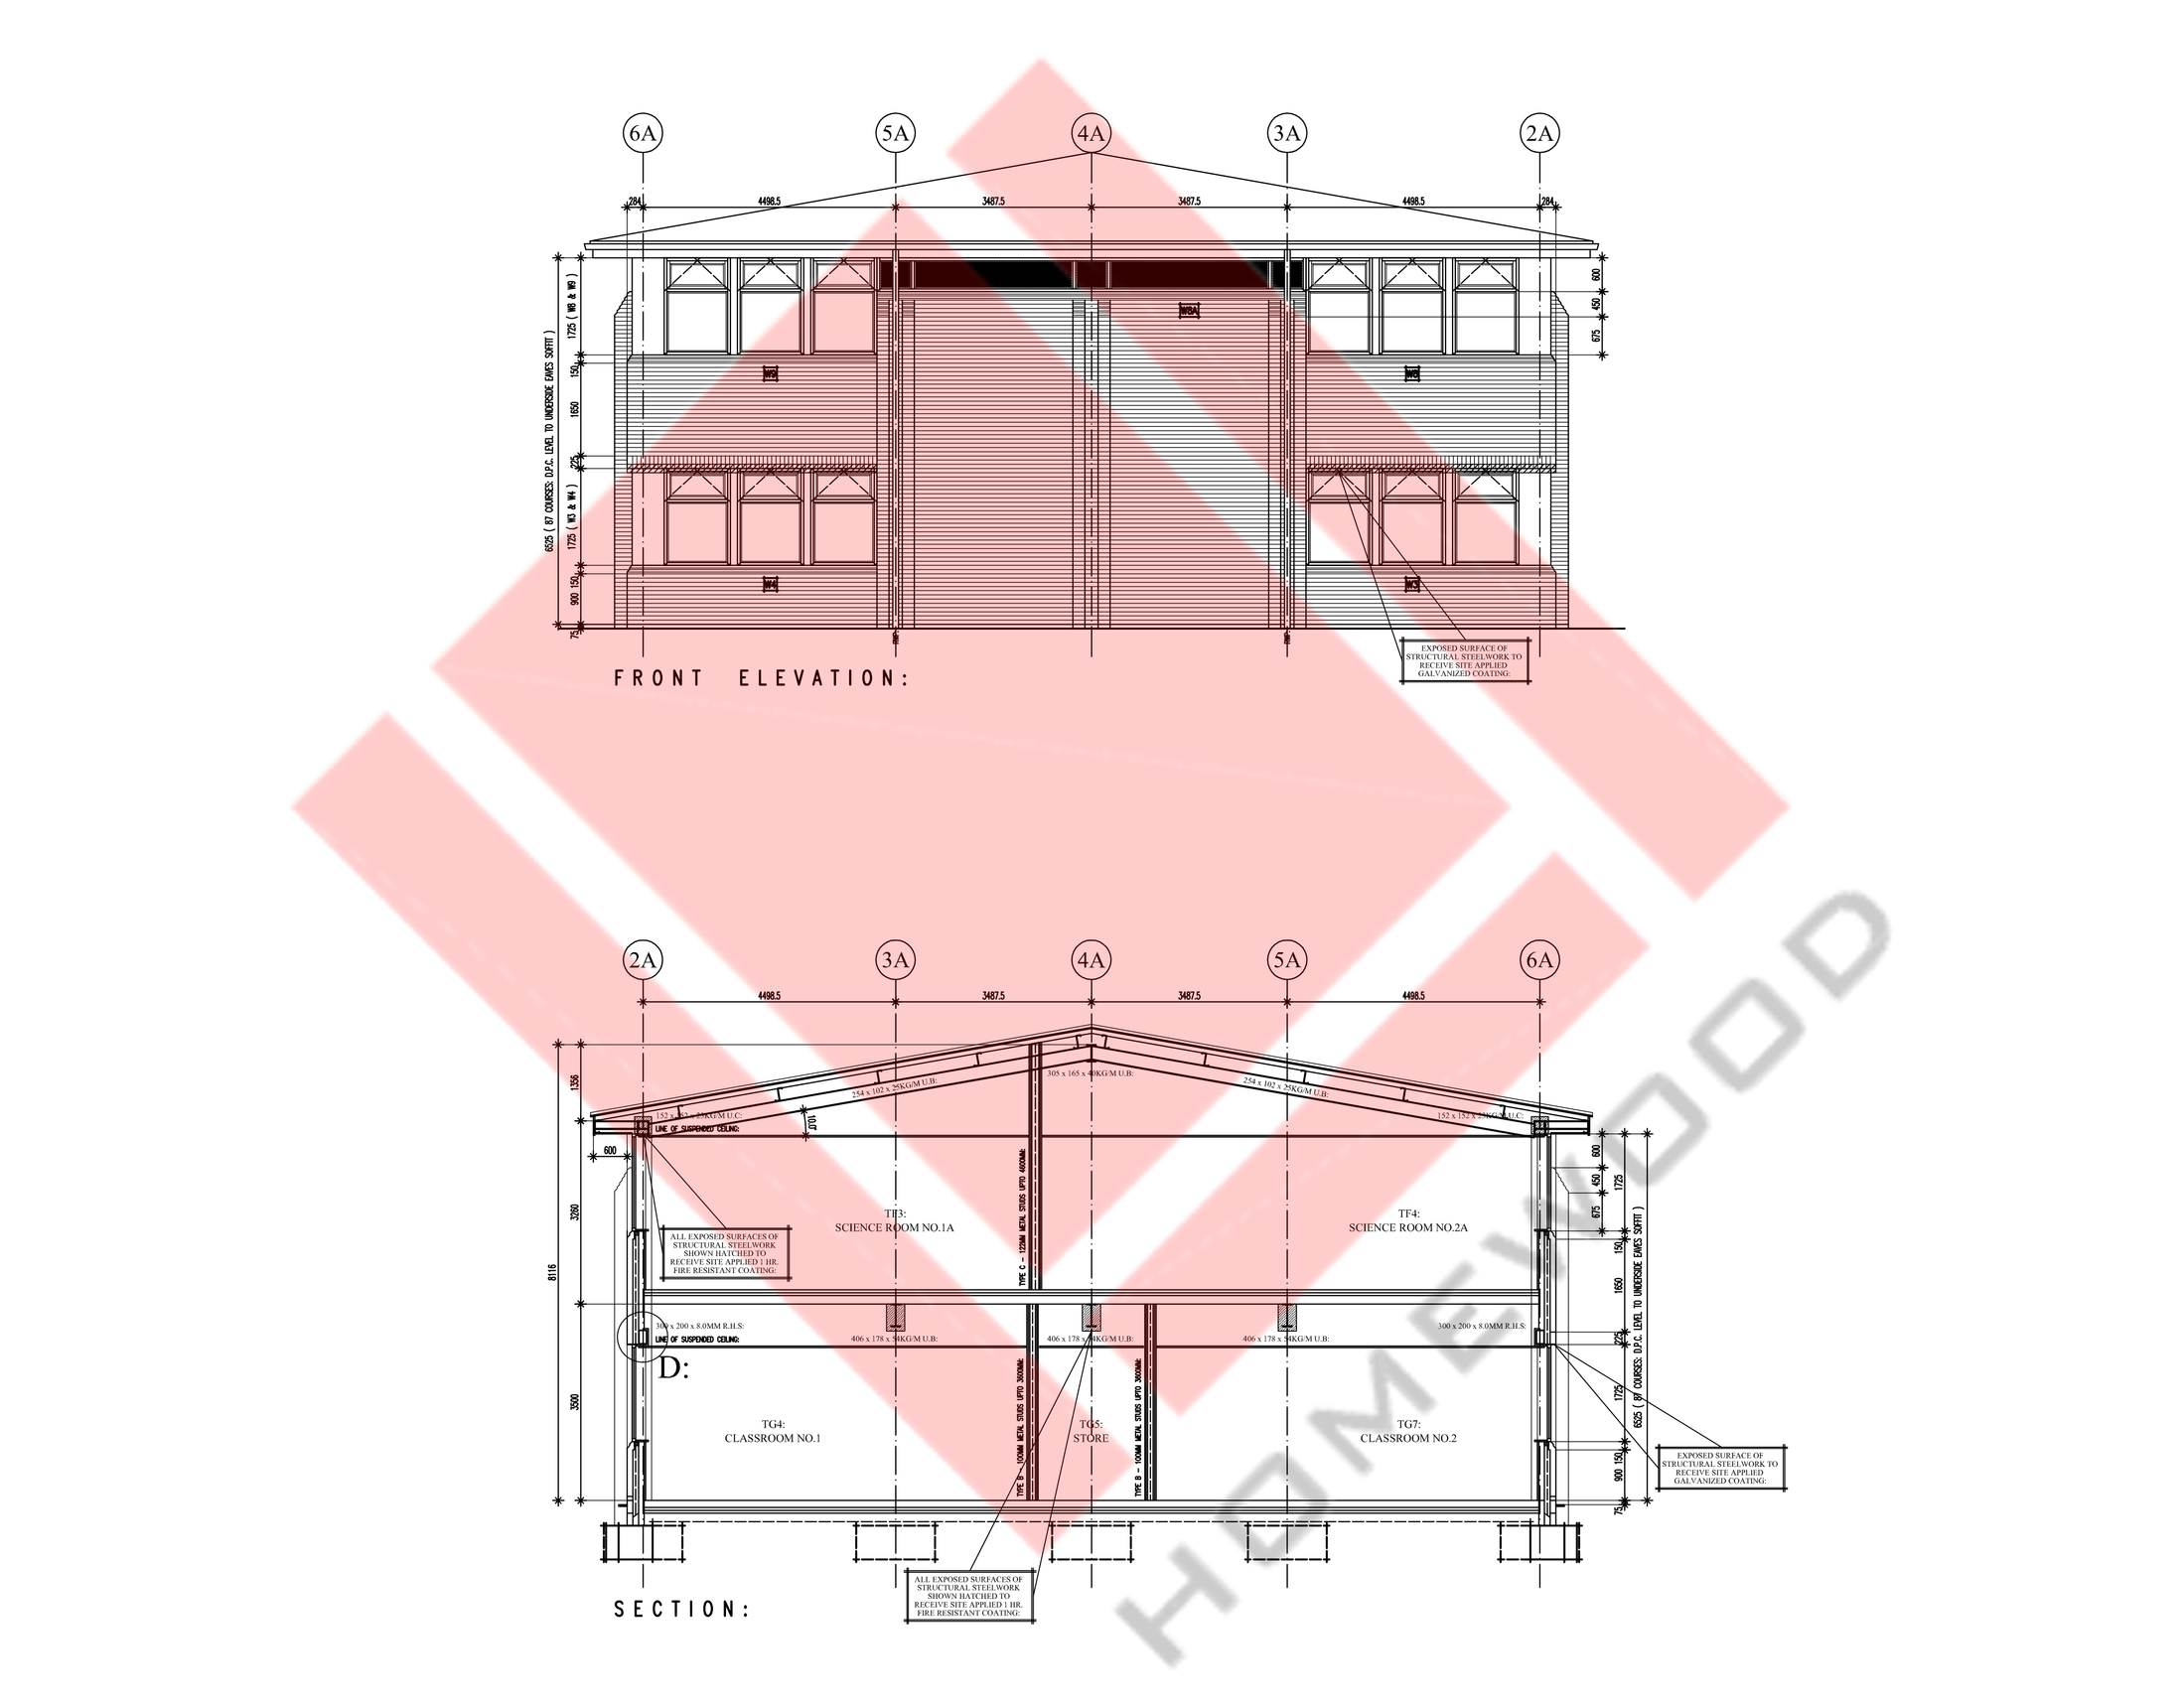 01 Elevation & Section.Image.Marked_1.png